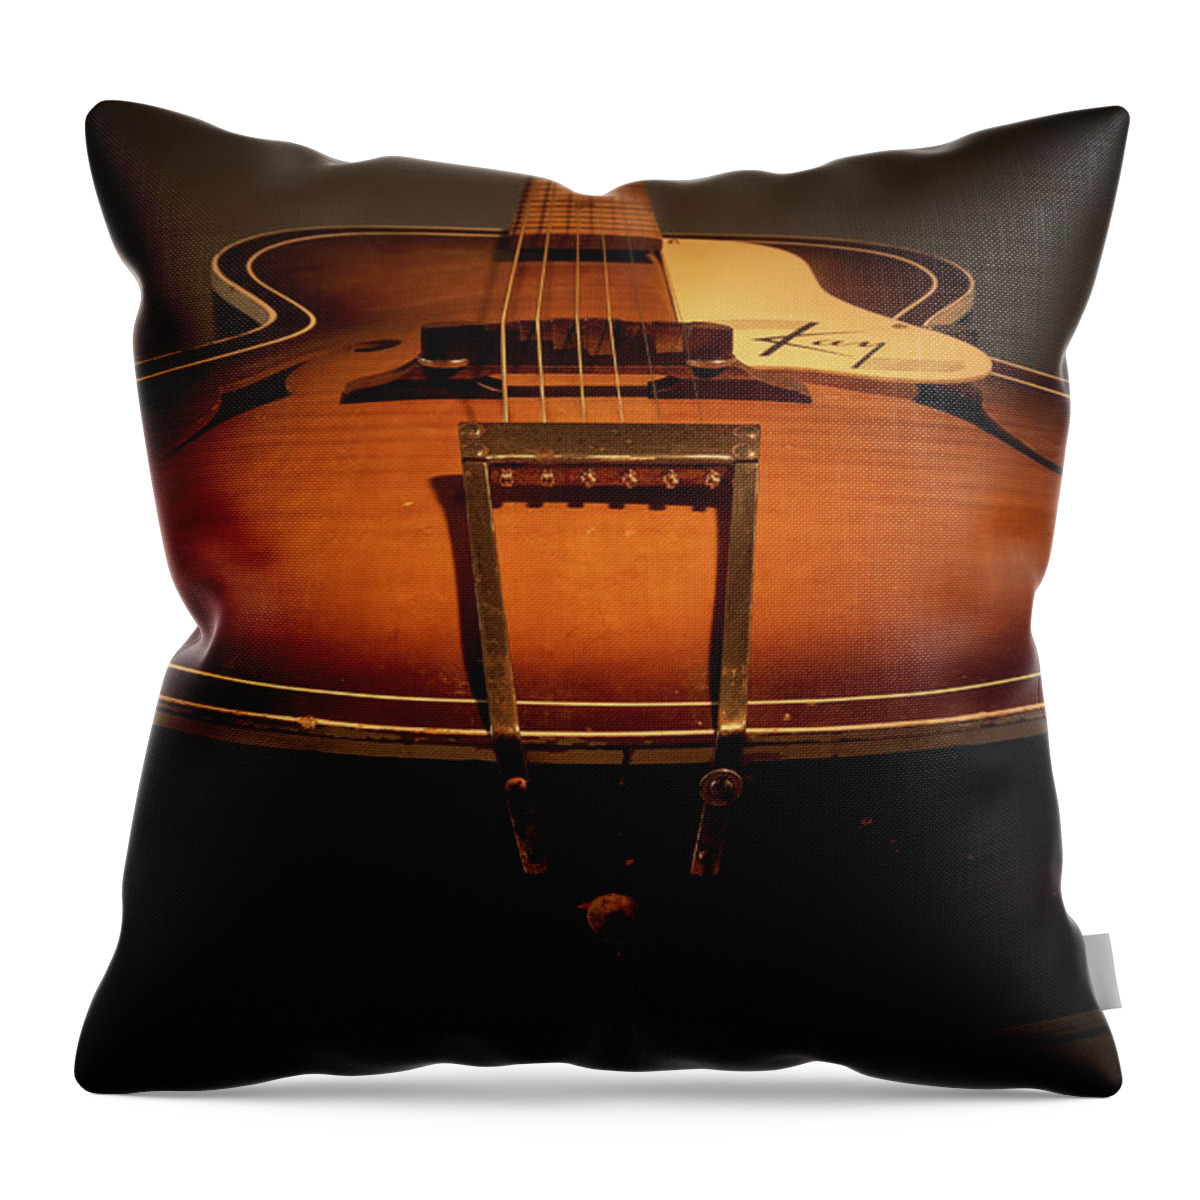 Guitar Throw Pillow featuring the photograph The Old Guitar by Deborah Ritch